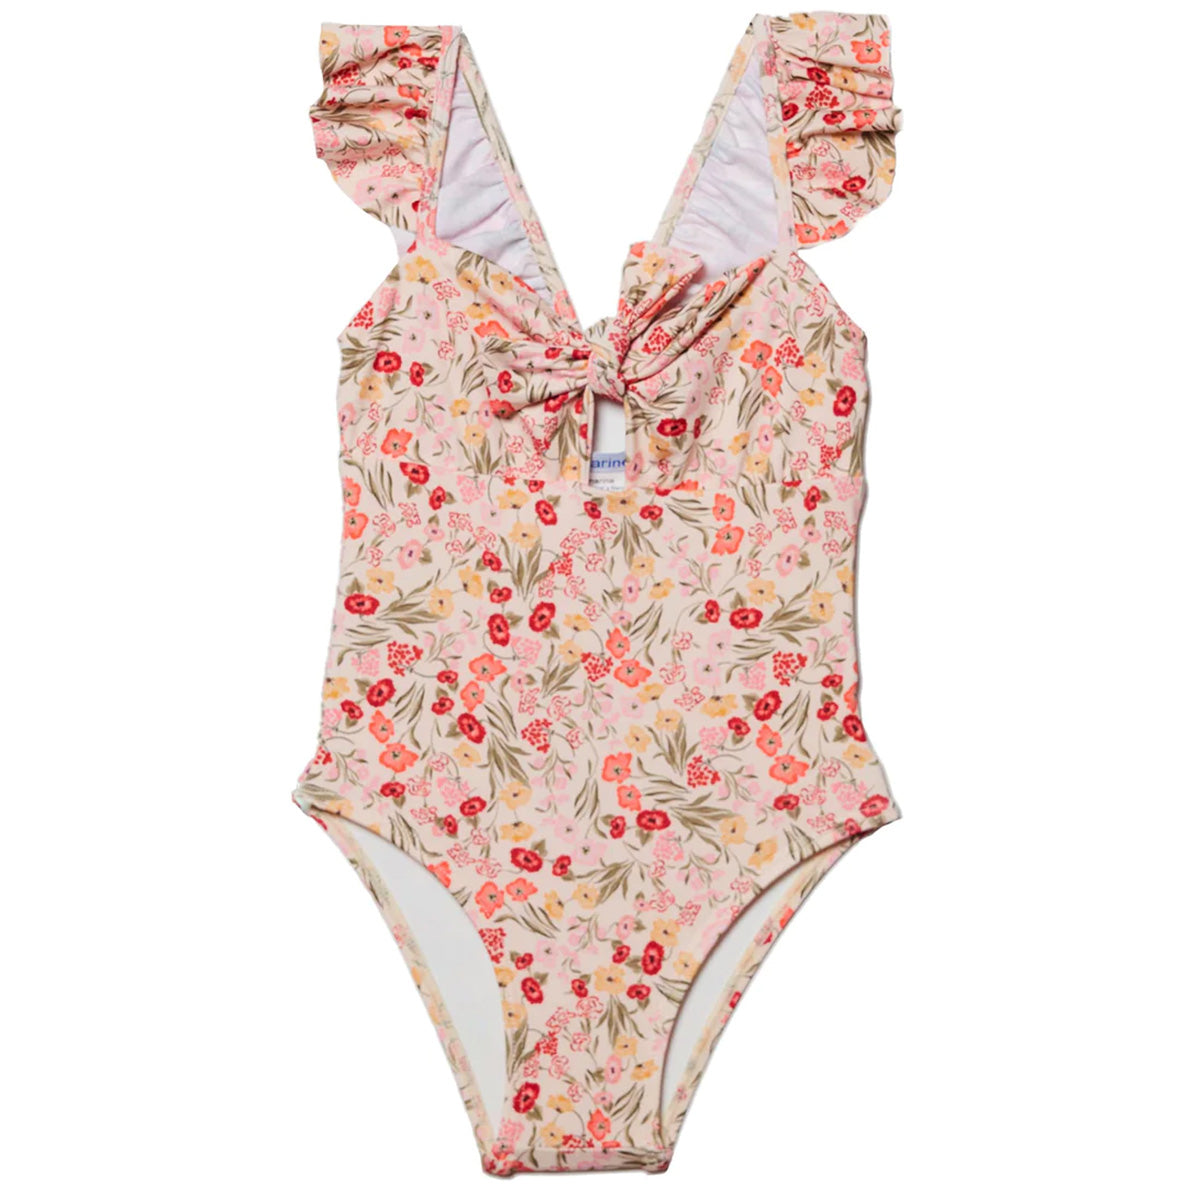 The Baby Girl Romance One Piece from Submarine Swim is the perfect swim for your baby